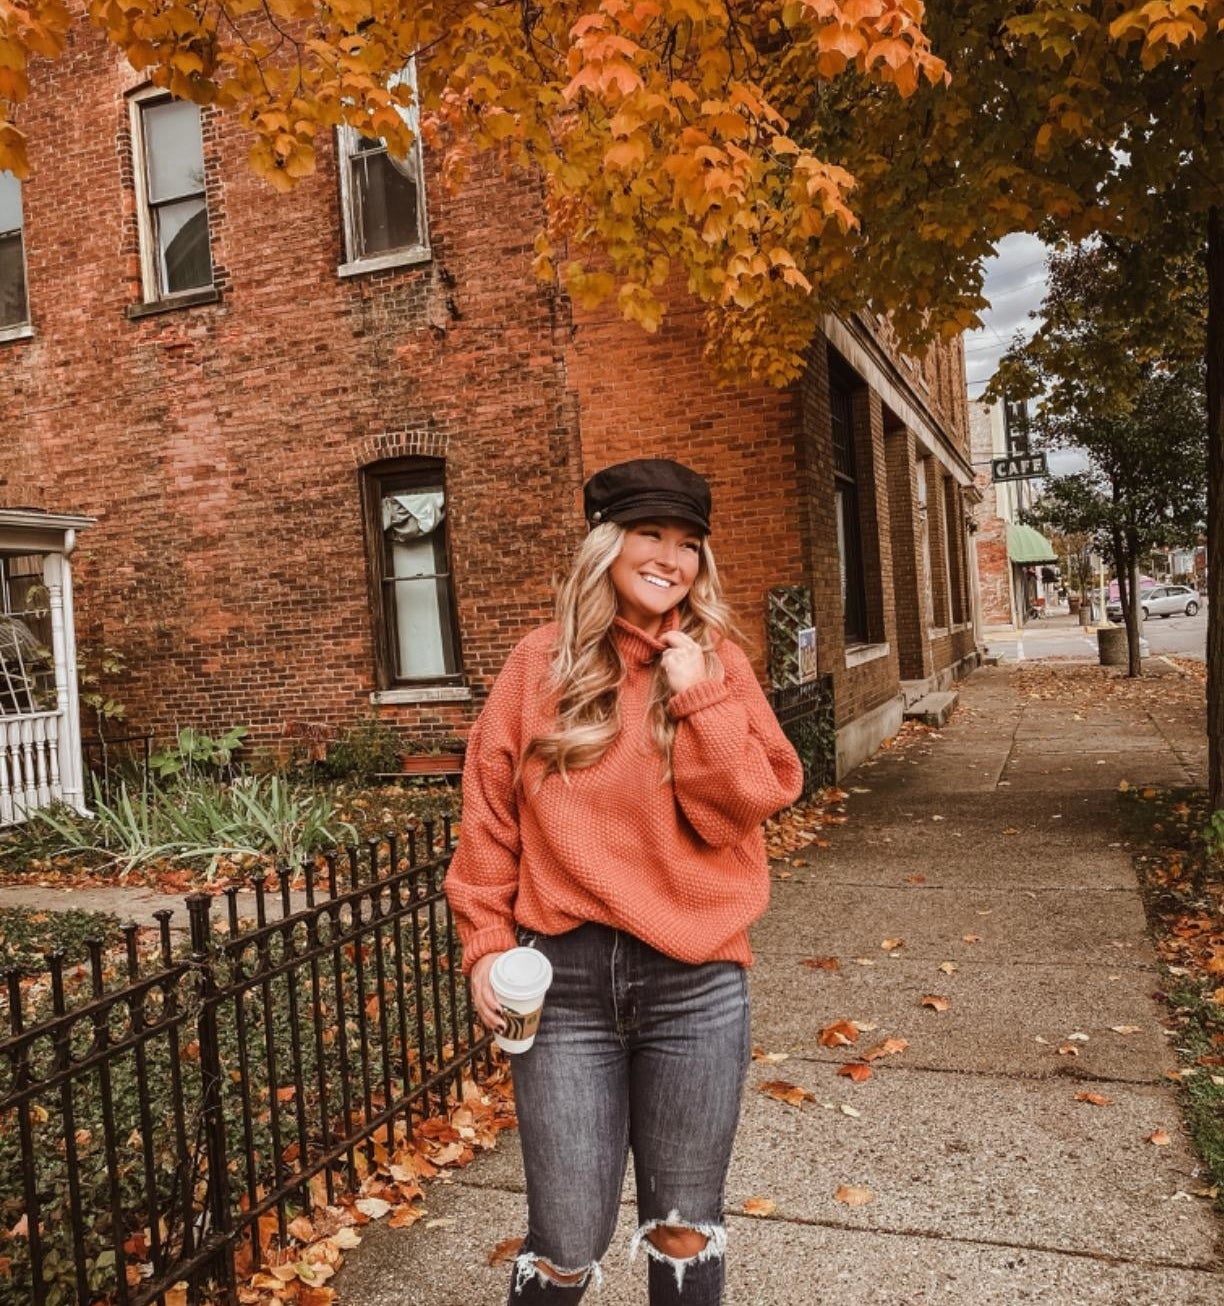 How could you go wrong with a cute cozy fall outfit🍂🙌🏻✨